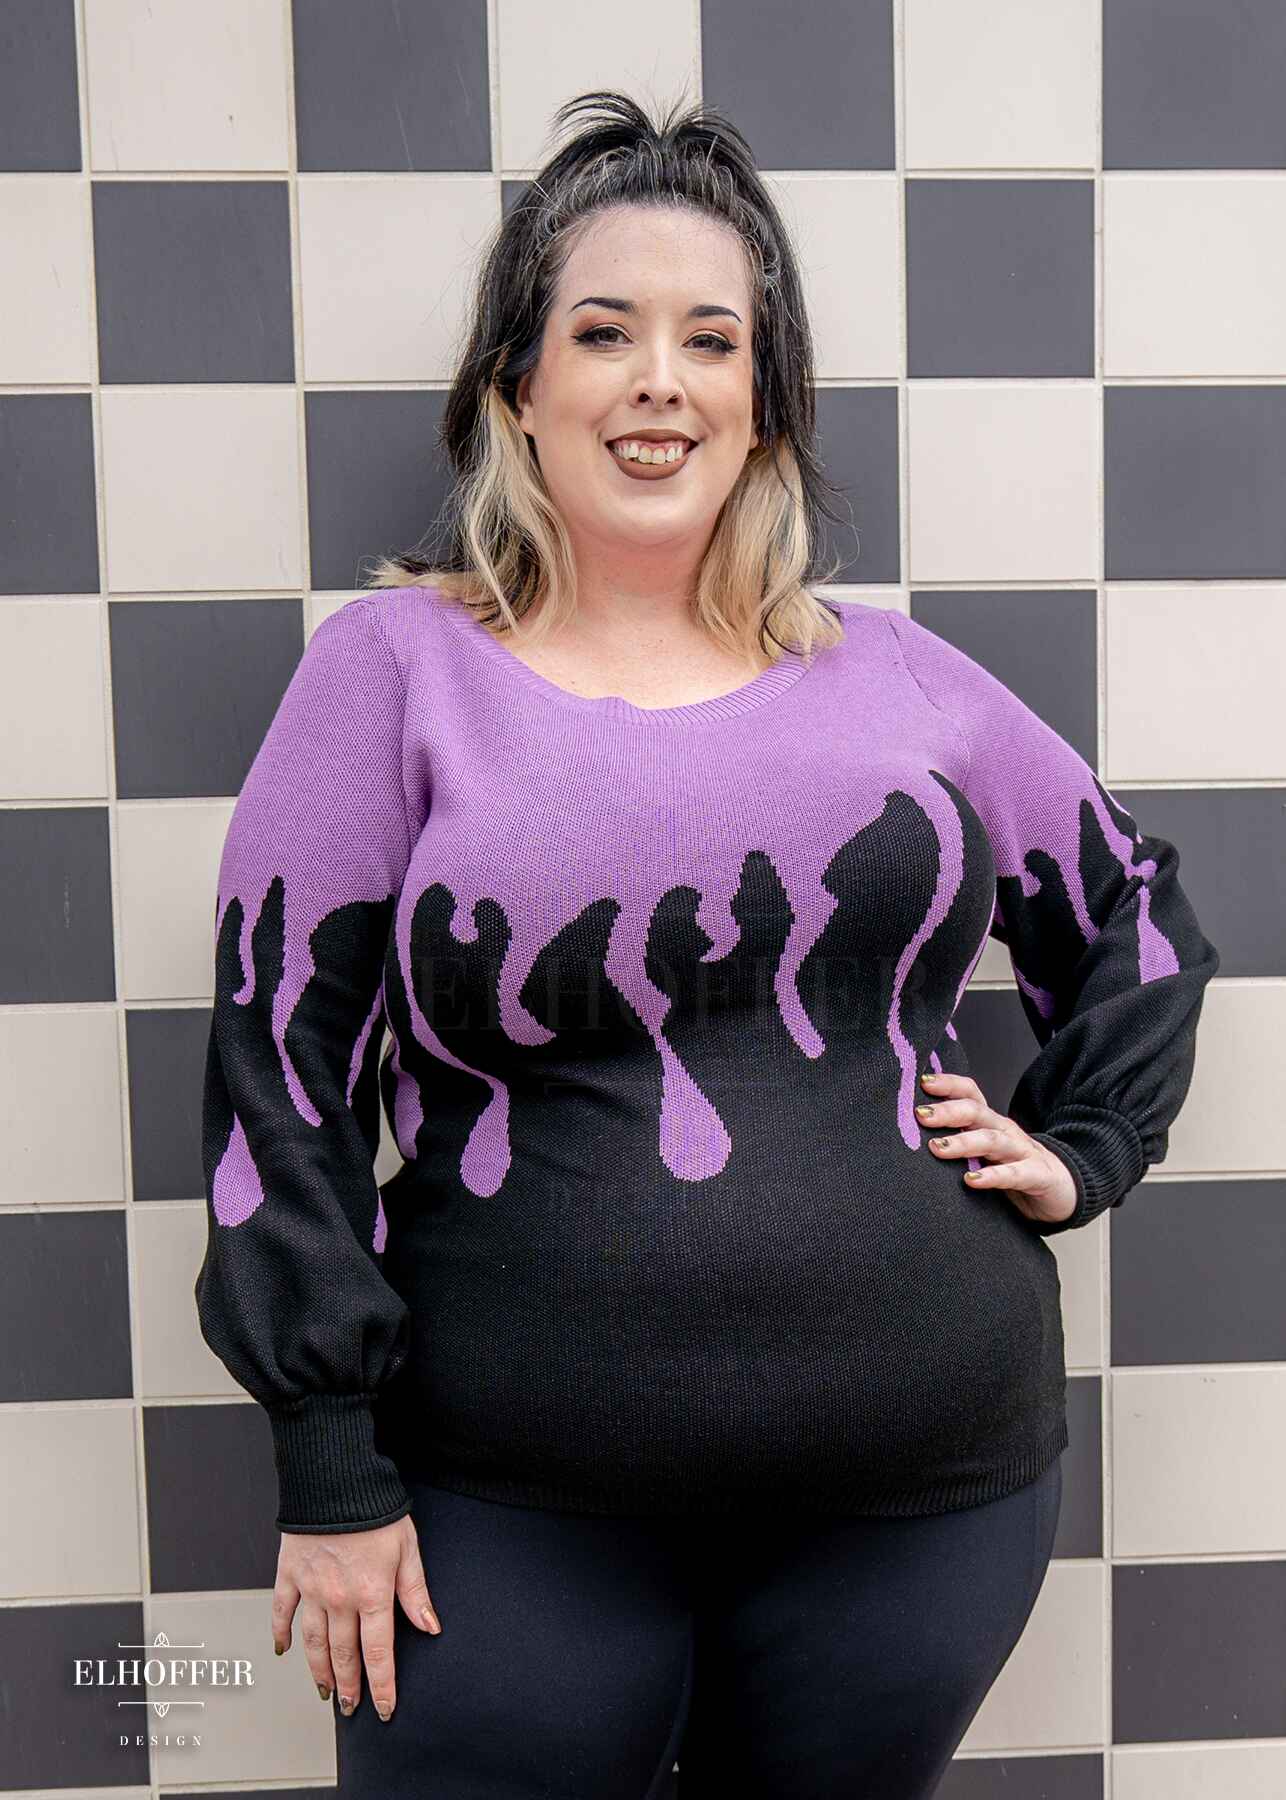 Katie Lynn, a fair skinned 2xl model with shoulder length wavy black and white hair, is smiling while wearing an oversize sweater with a lavender purple drip design that looks like it's oozing down onto a black sweater that has long billowing sleeves with thumbholes.